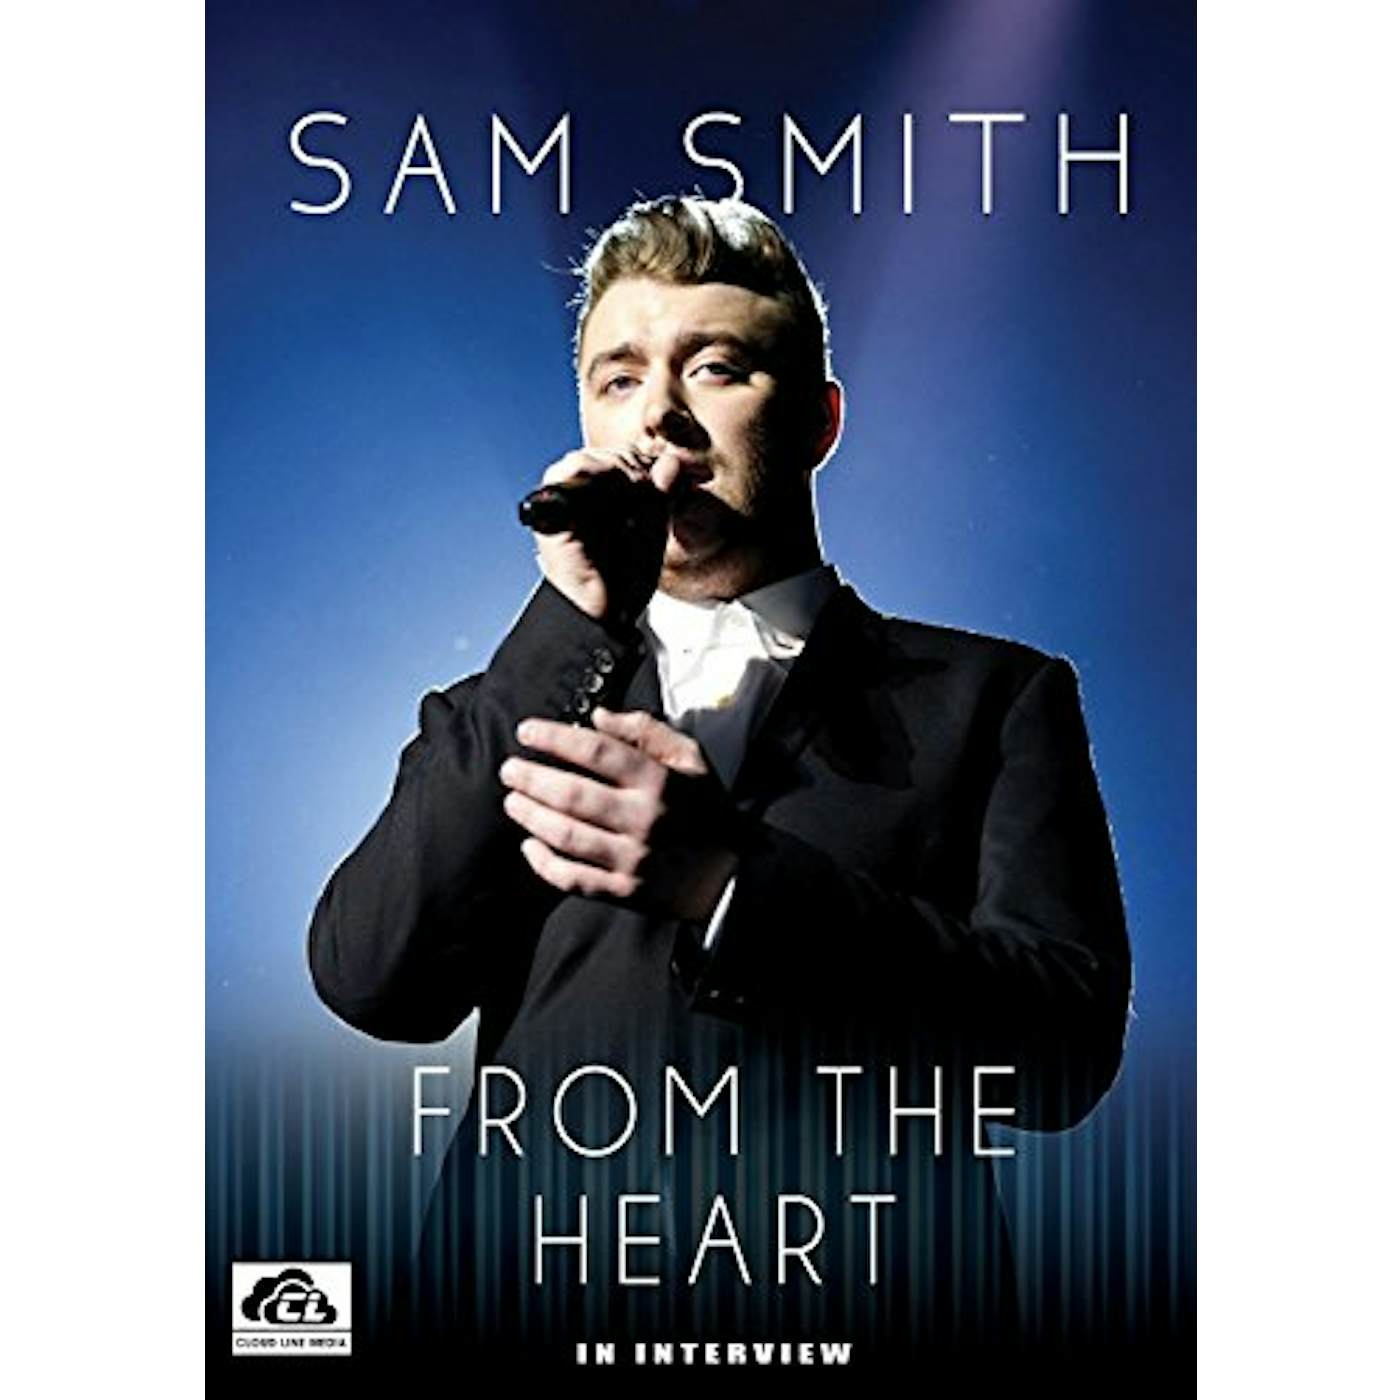 SAM SMITH FROM THE HEART DVD